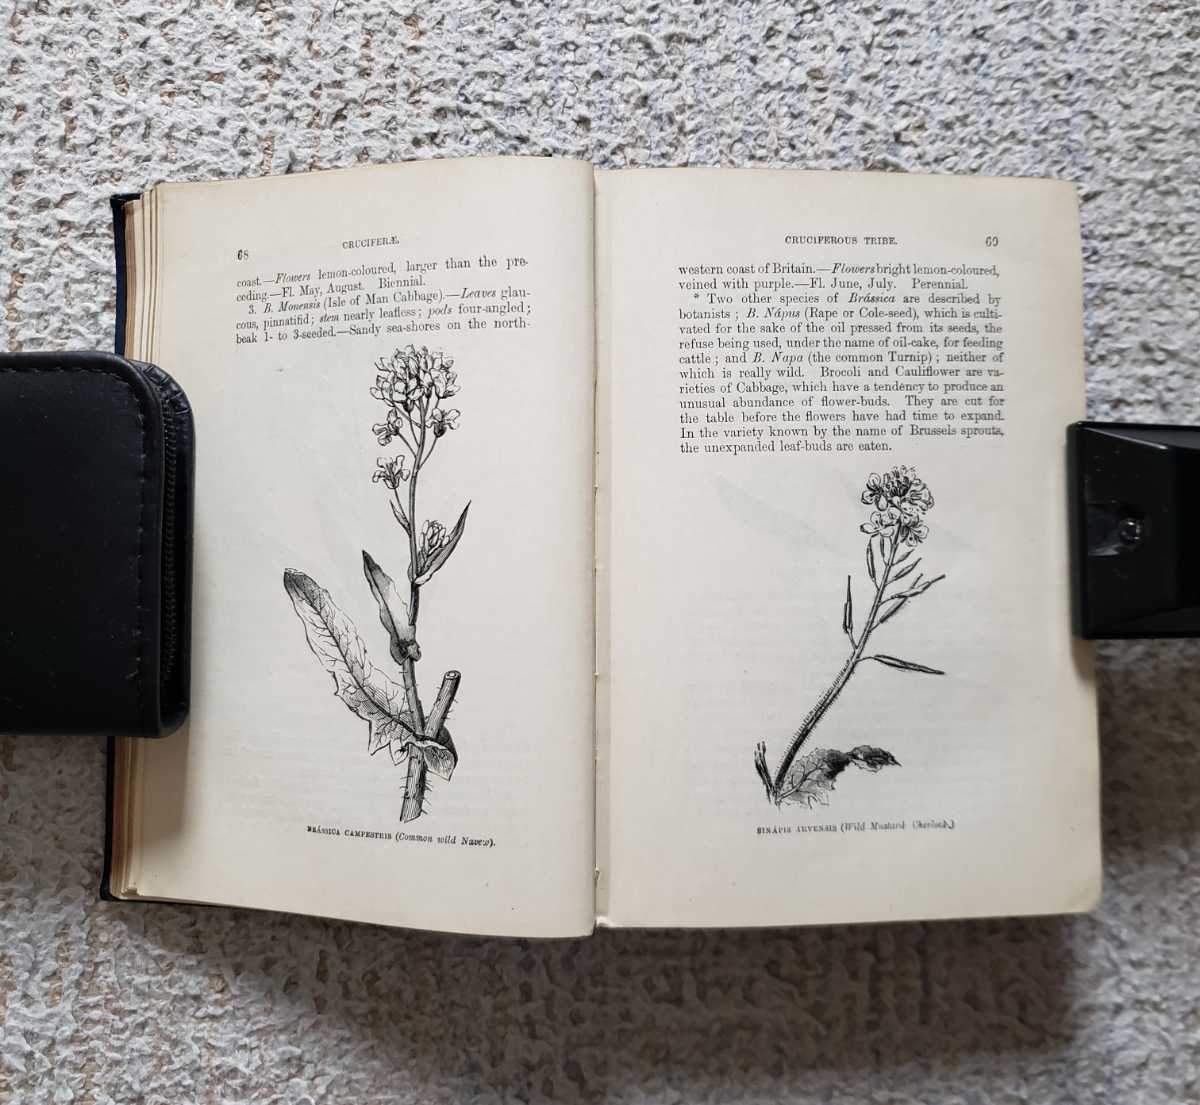 1894 year plant illustrated reference book [Flowers of the Field, with Appendix on Grasses]